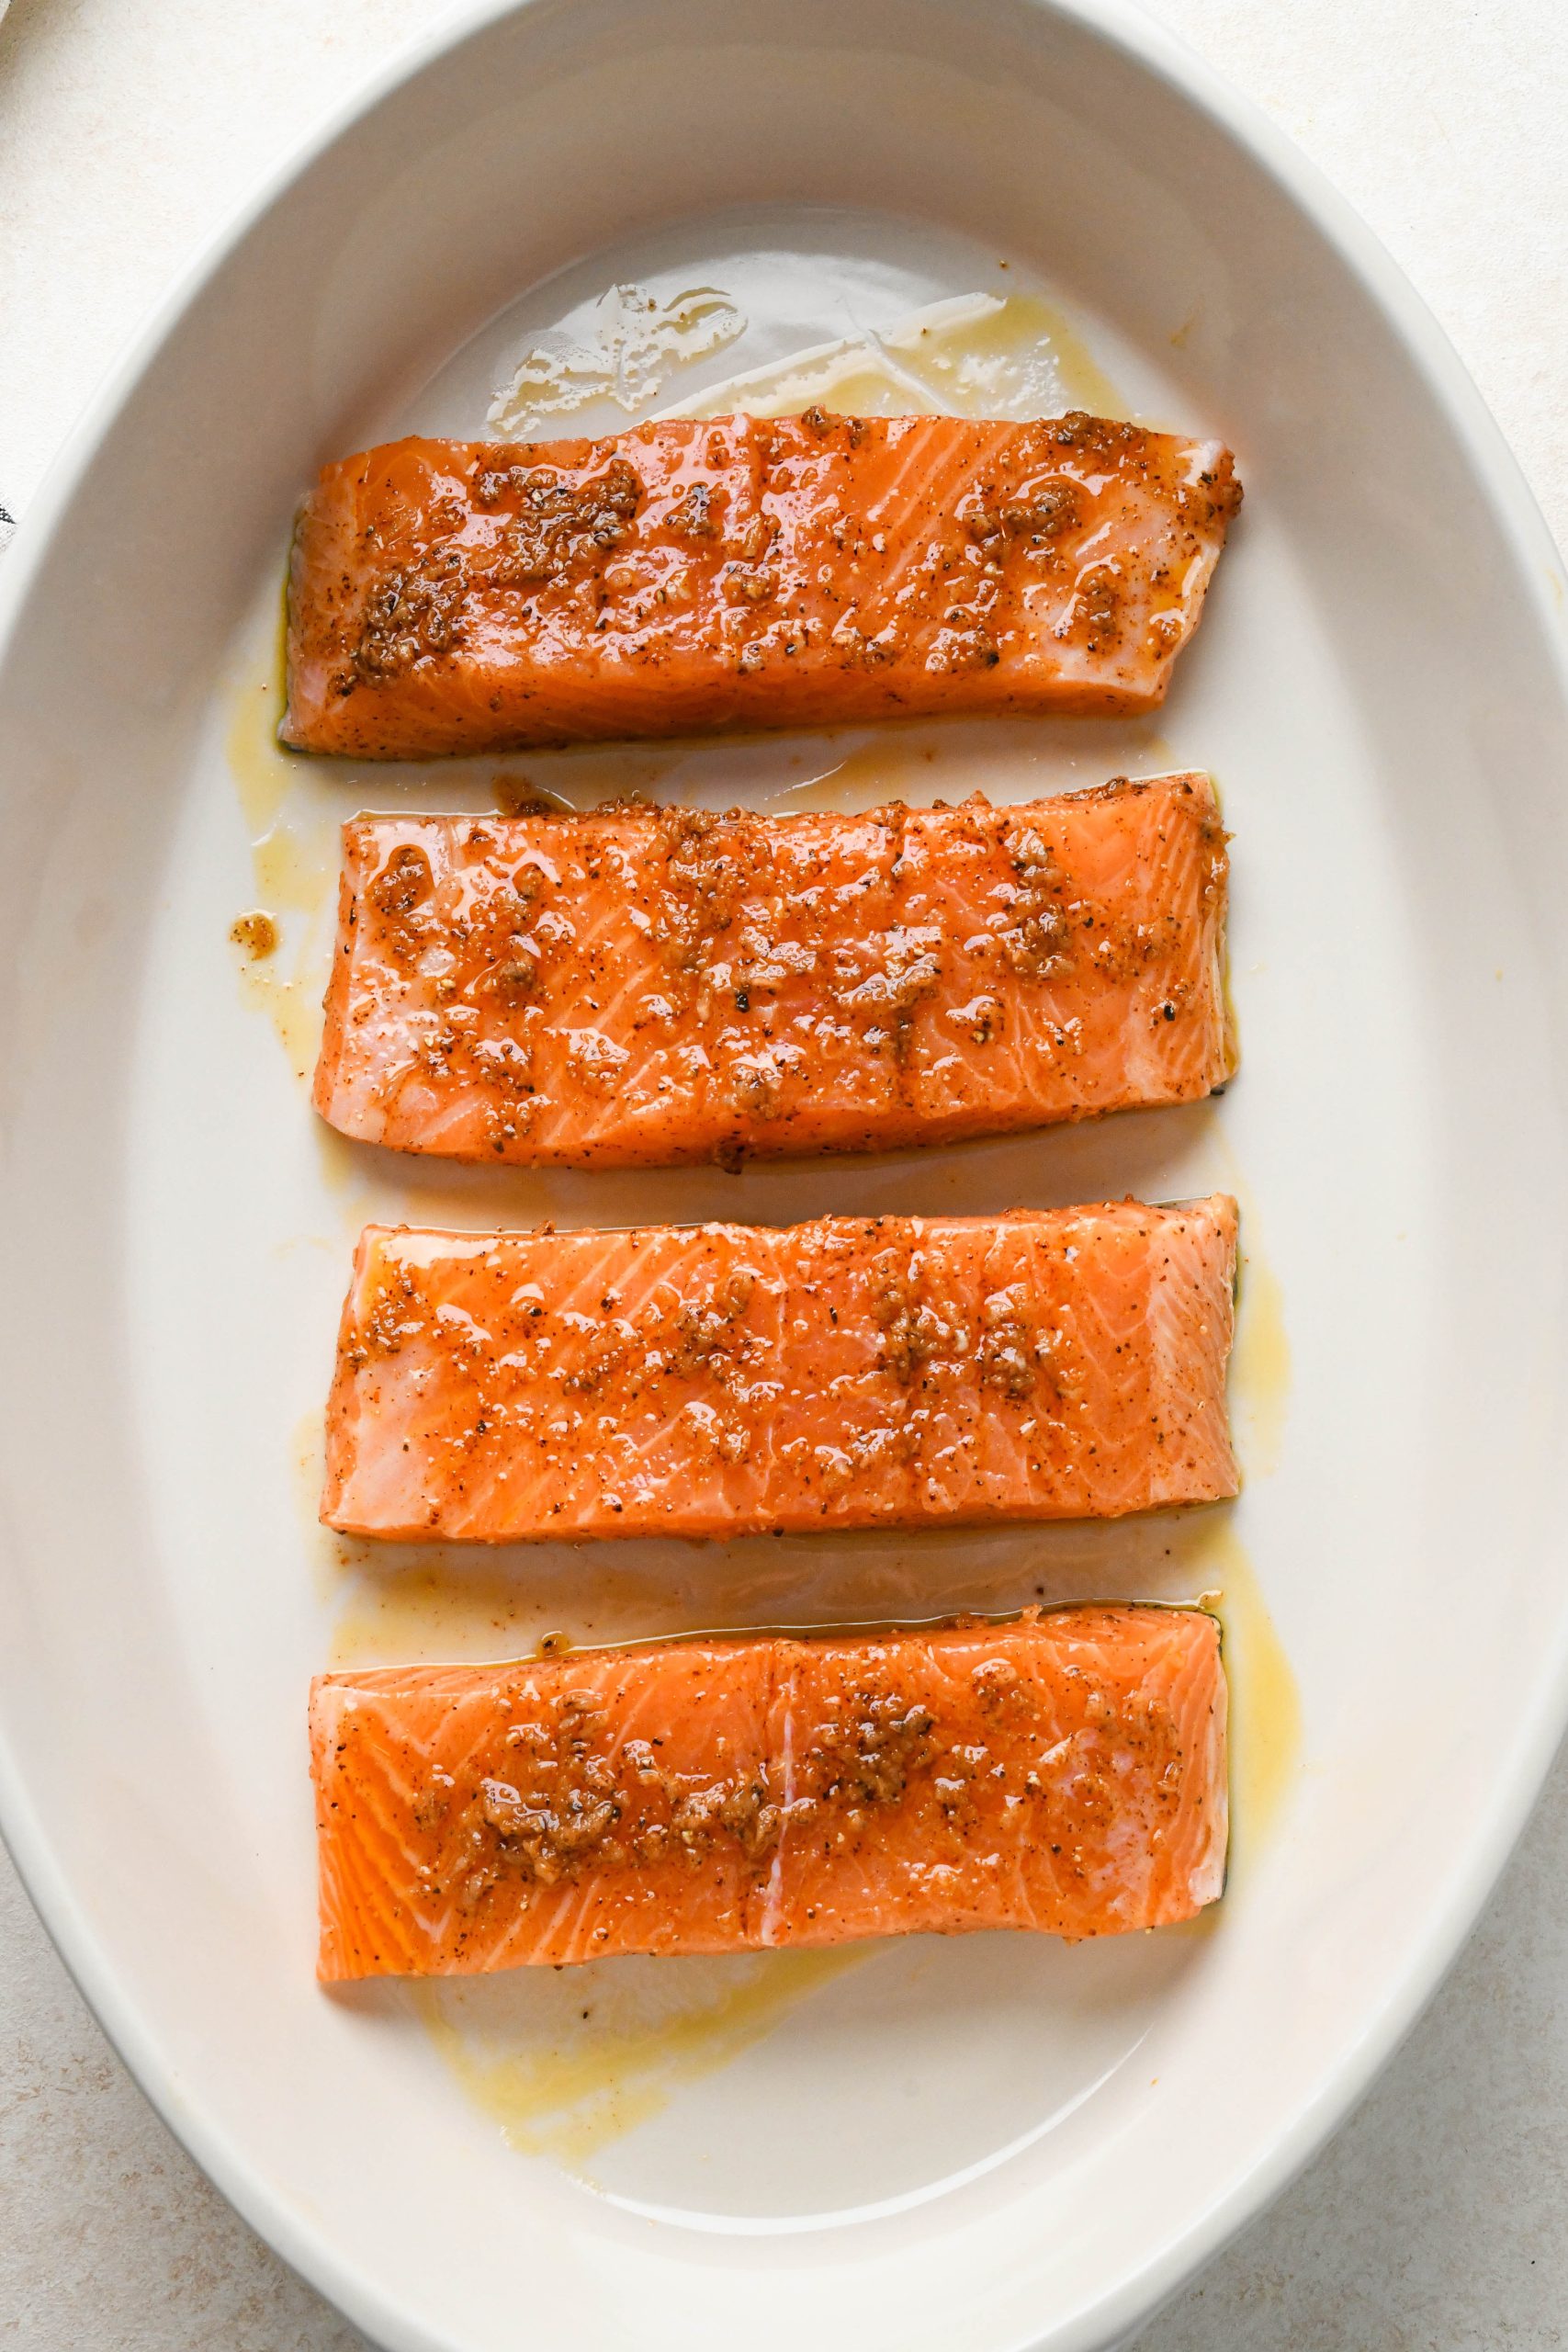 How to make baked salmon: Coated salmon fillets before baking in a baking dish.